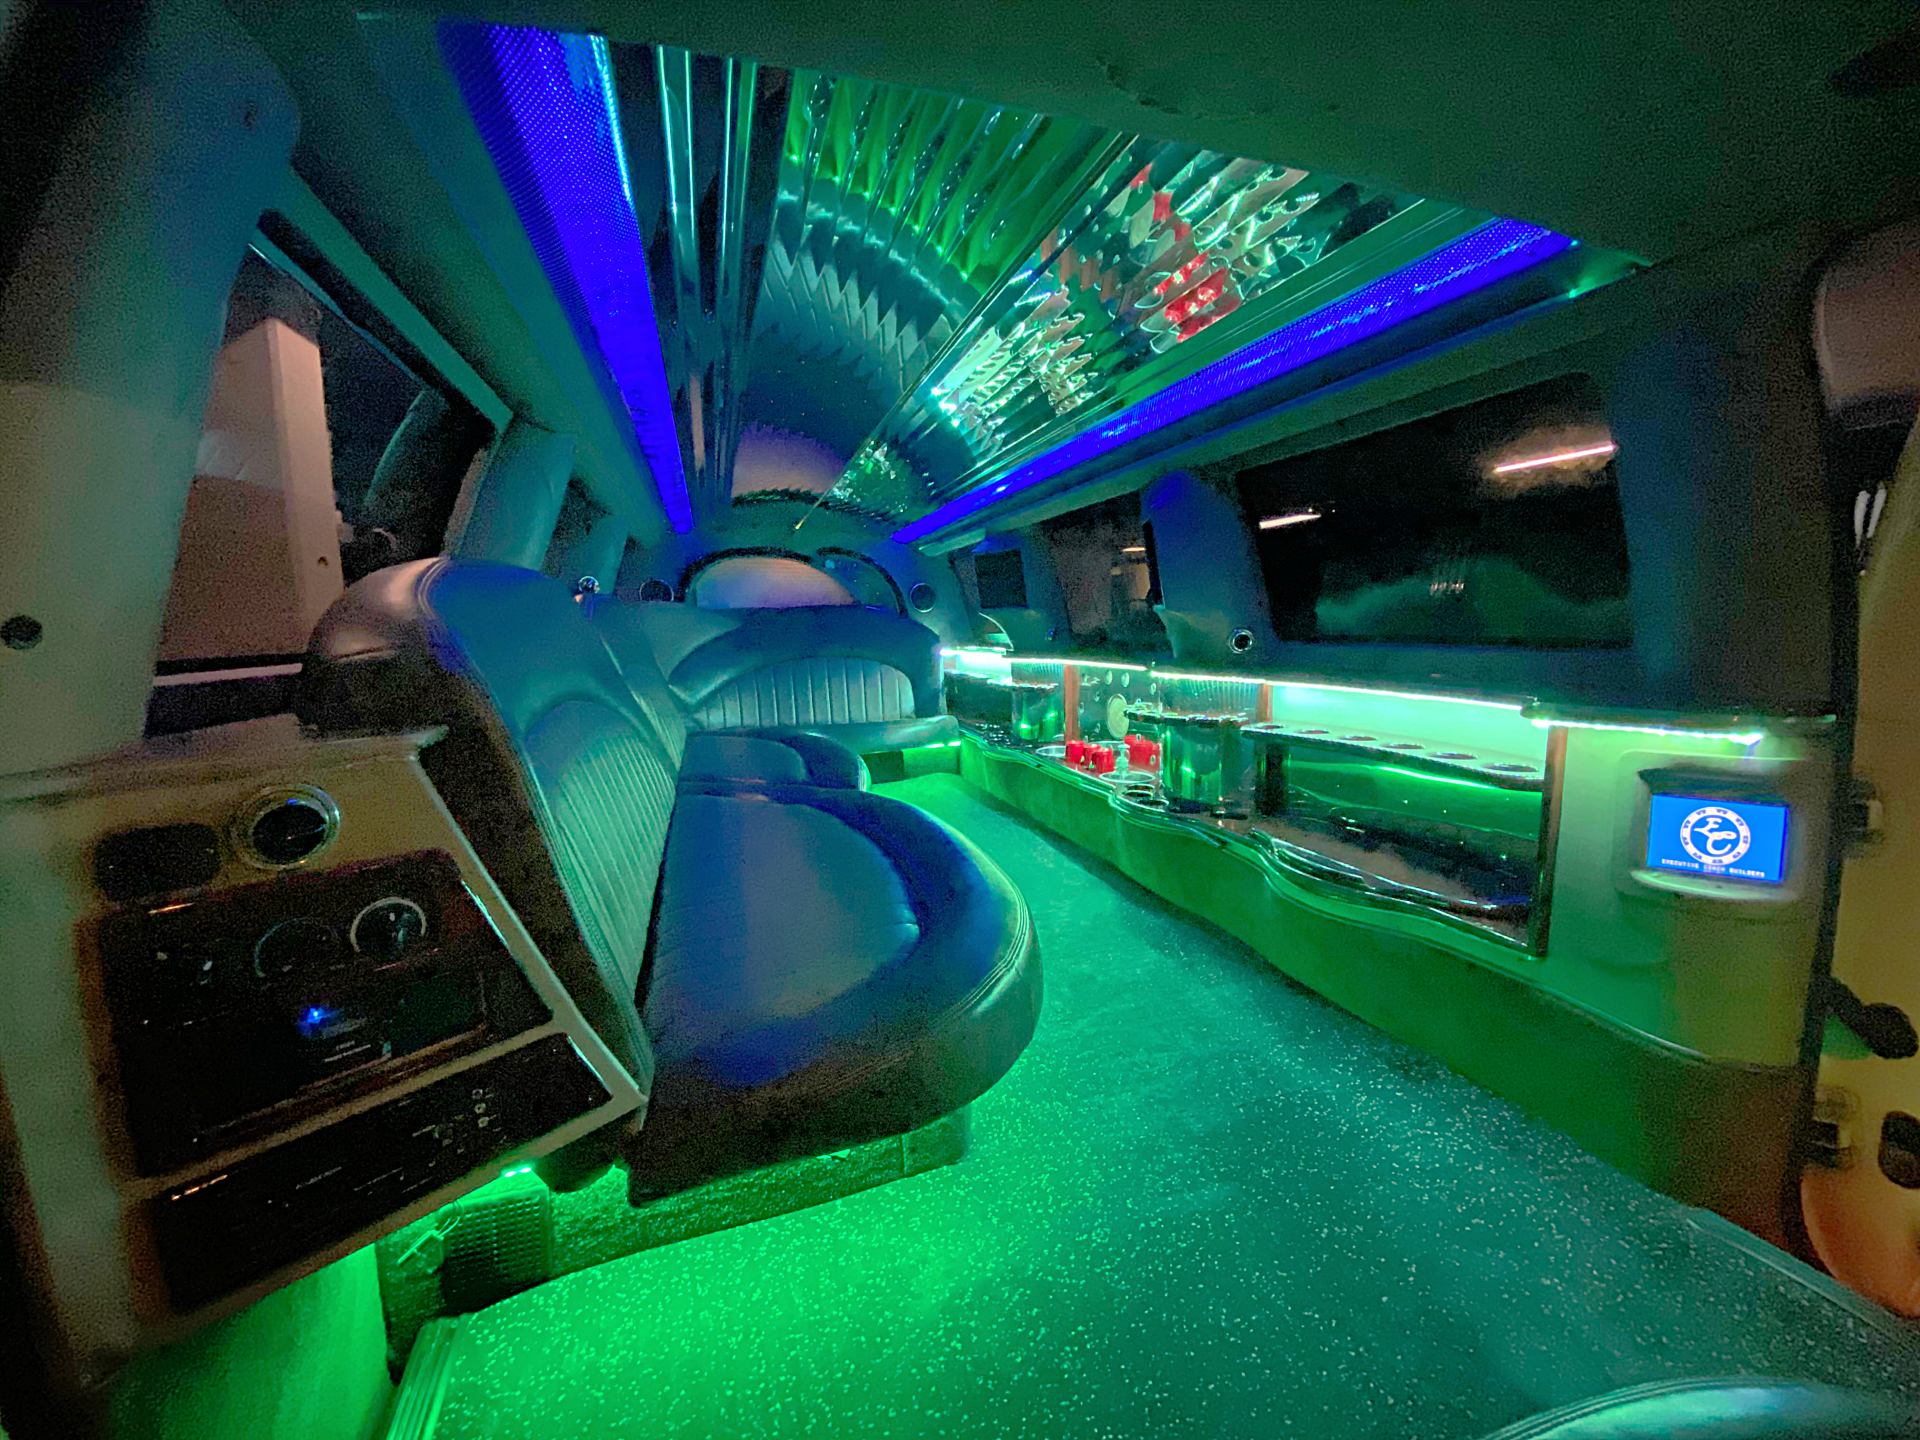 white 14 passenger Excursion limousine interior with green LED back lighting, J seating and full bar area